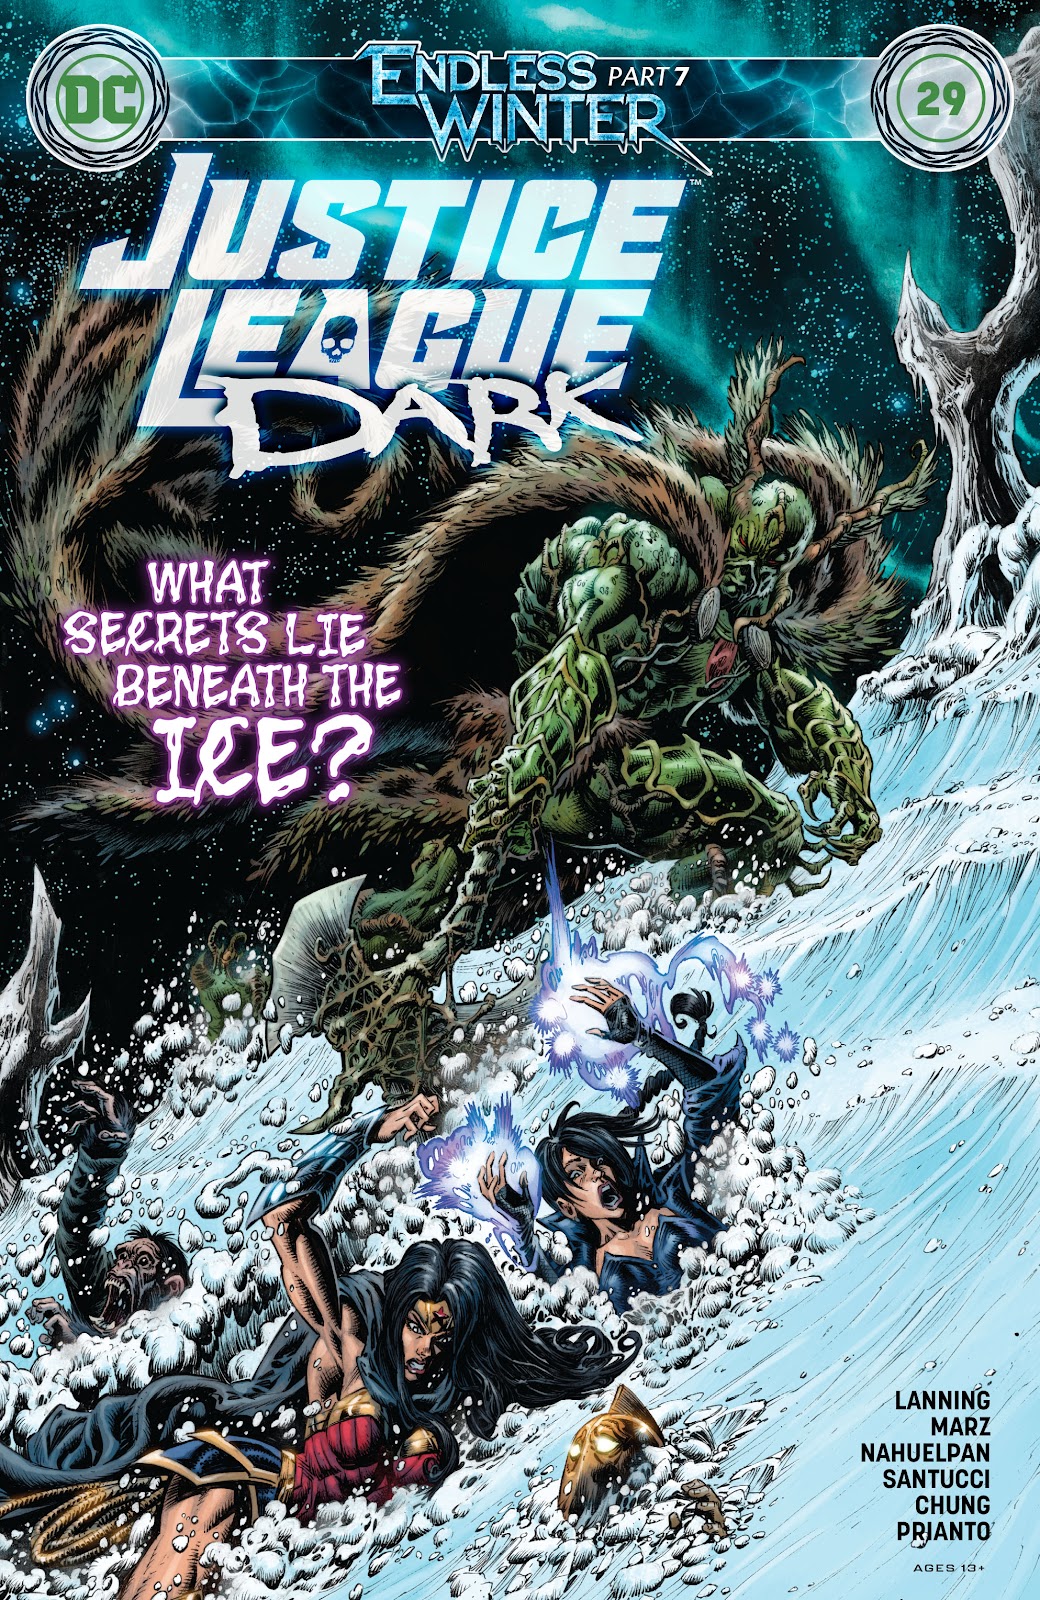 Justice League Dark (2018) issue 29 - Page 1